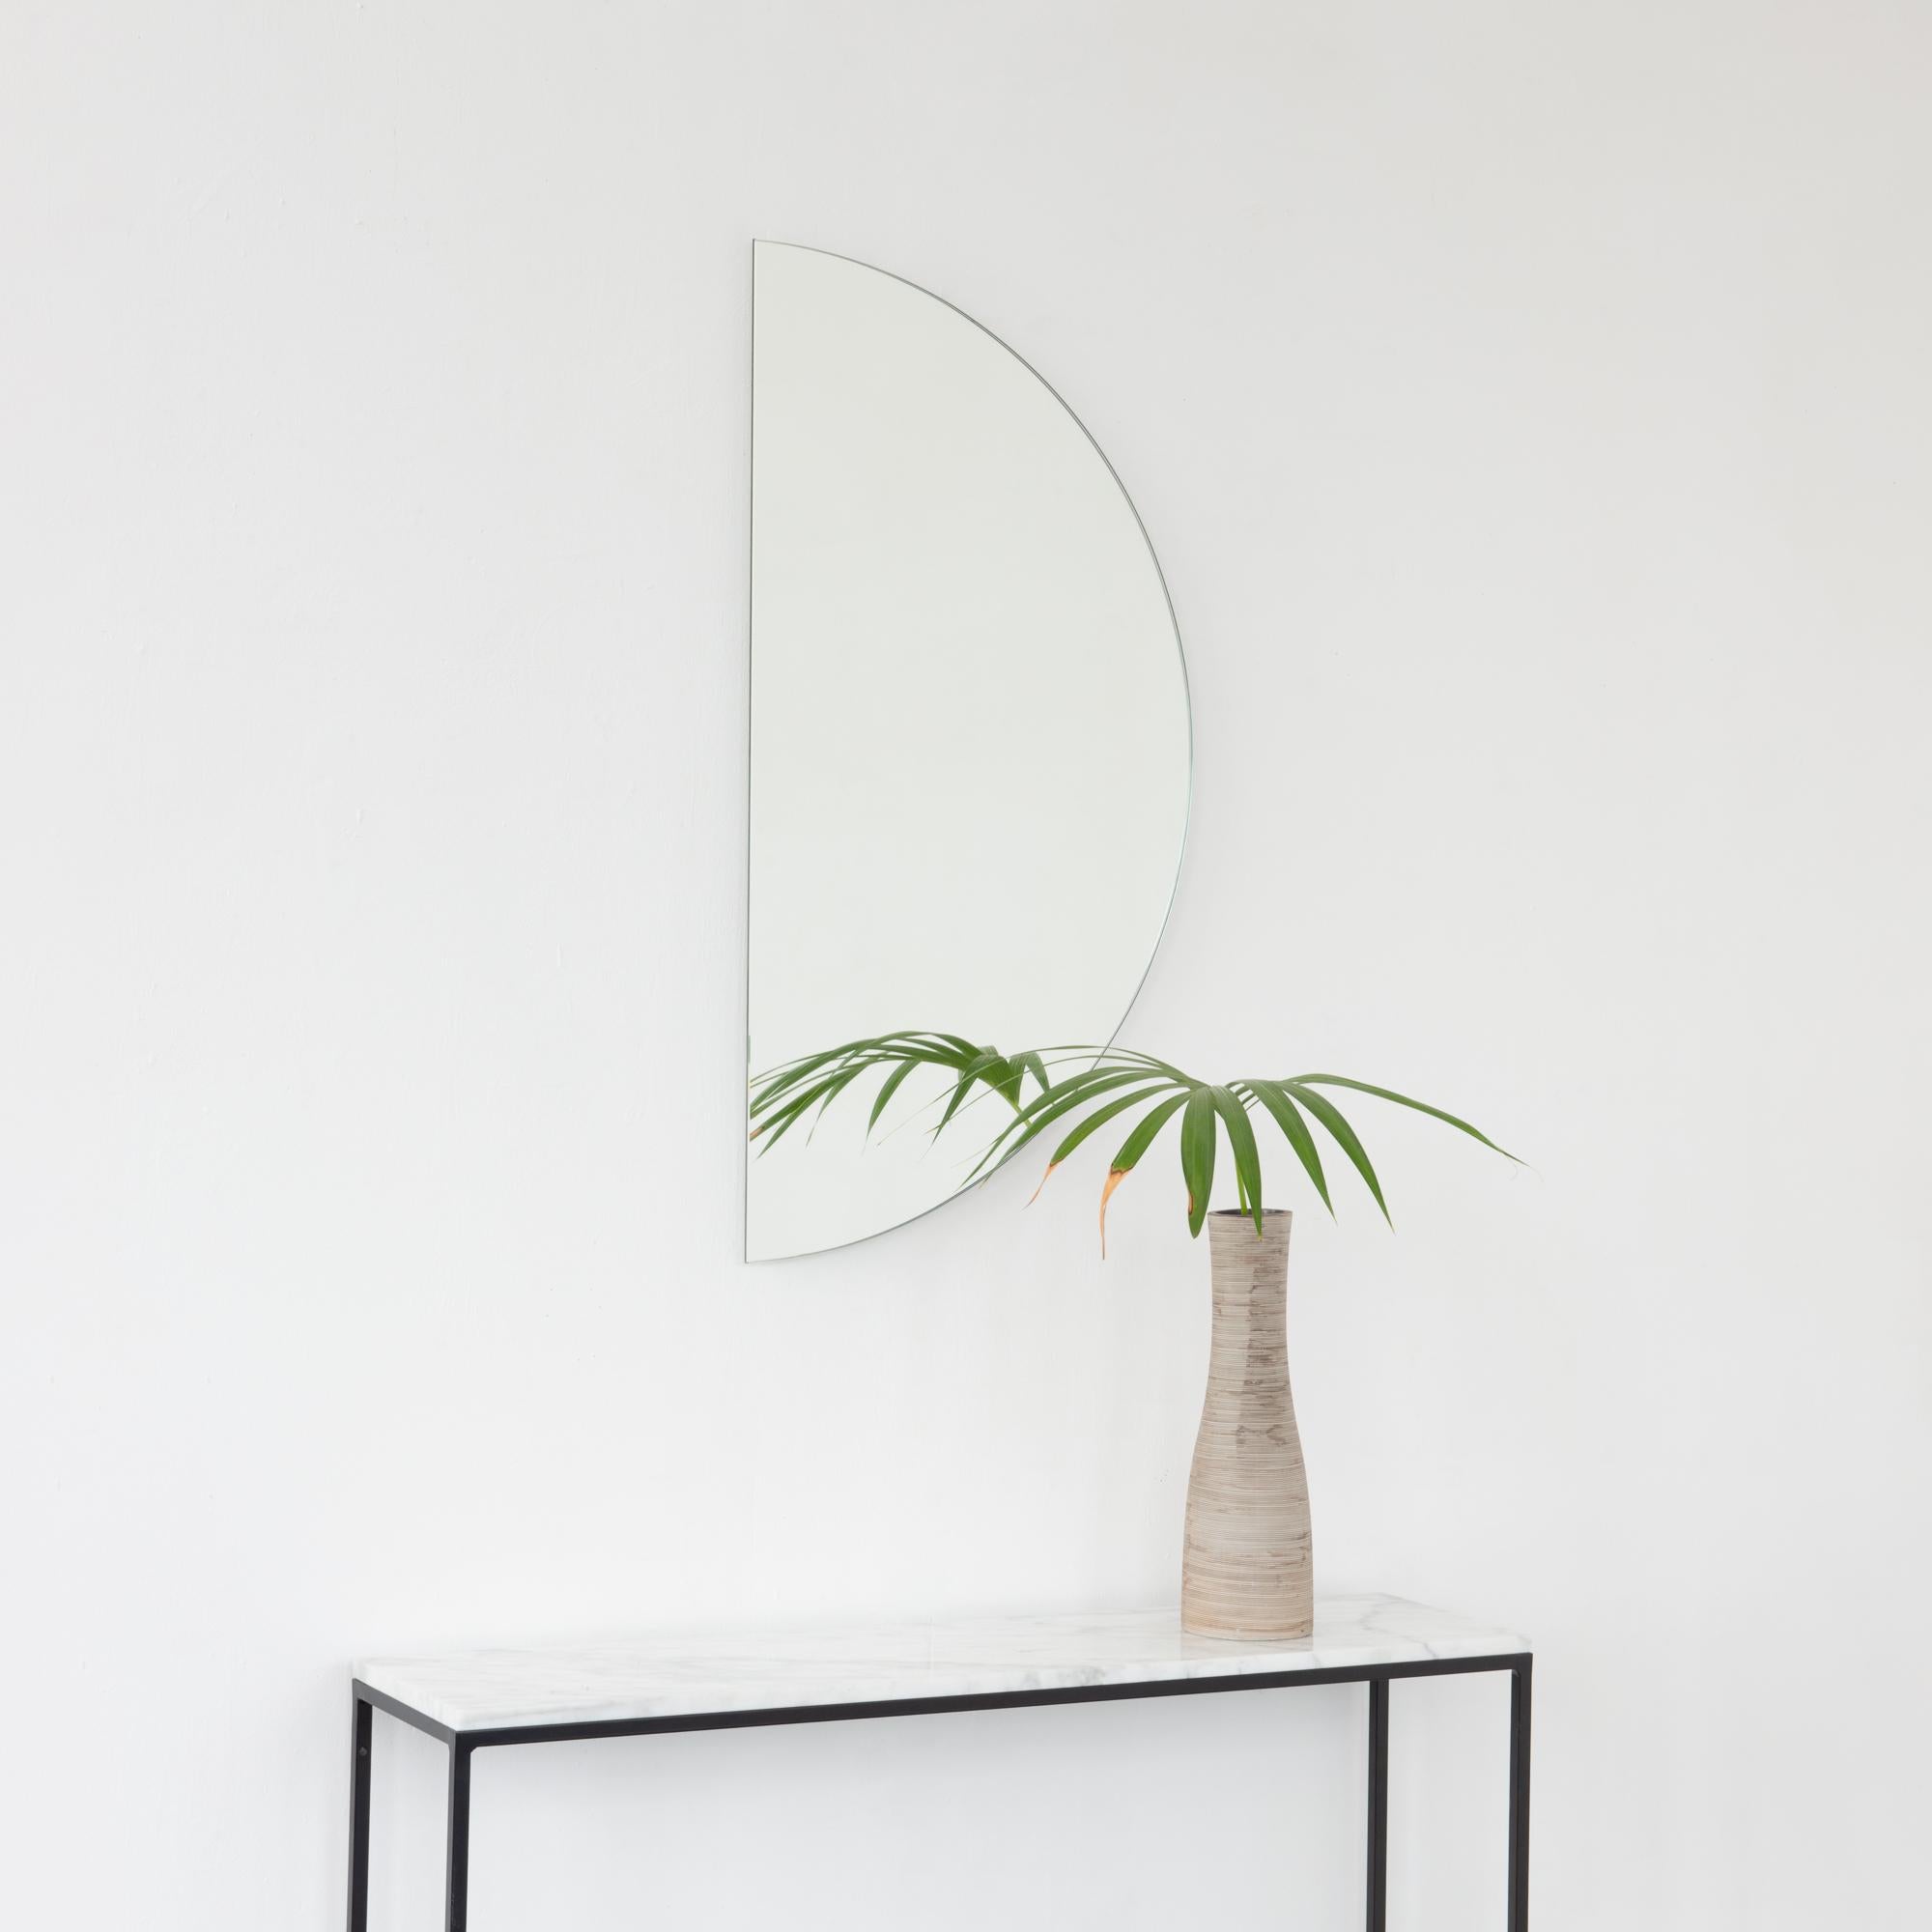 Minimalist Luna™ half-moon frameless mirror with a floating effect. Fitted with a quality and ingenious hanging system for a flexible installation in 4 different directions. Designed and made in London, UK.

The backing has a brand new design that